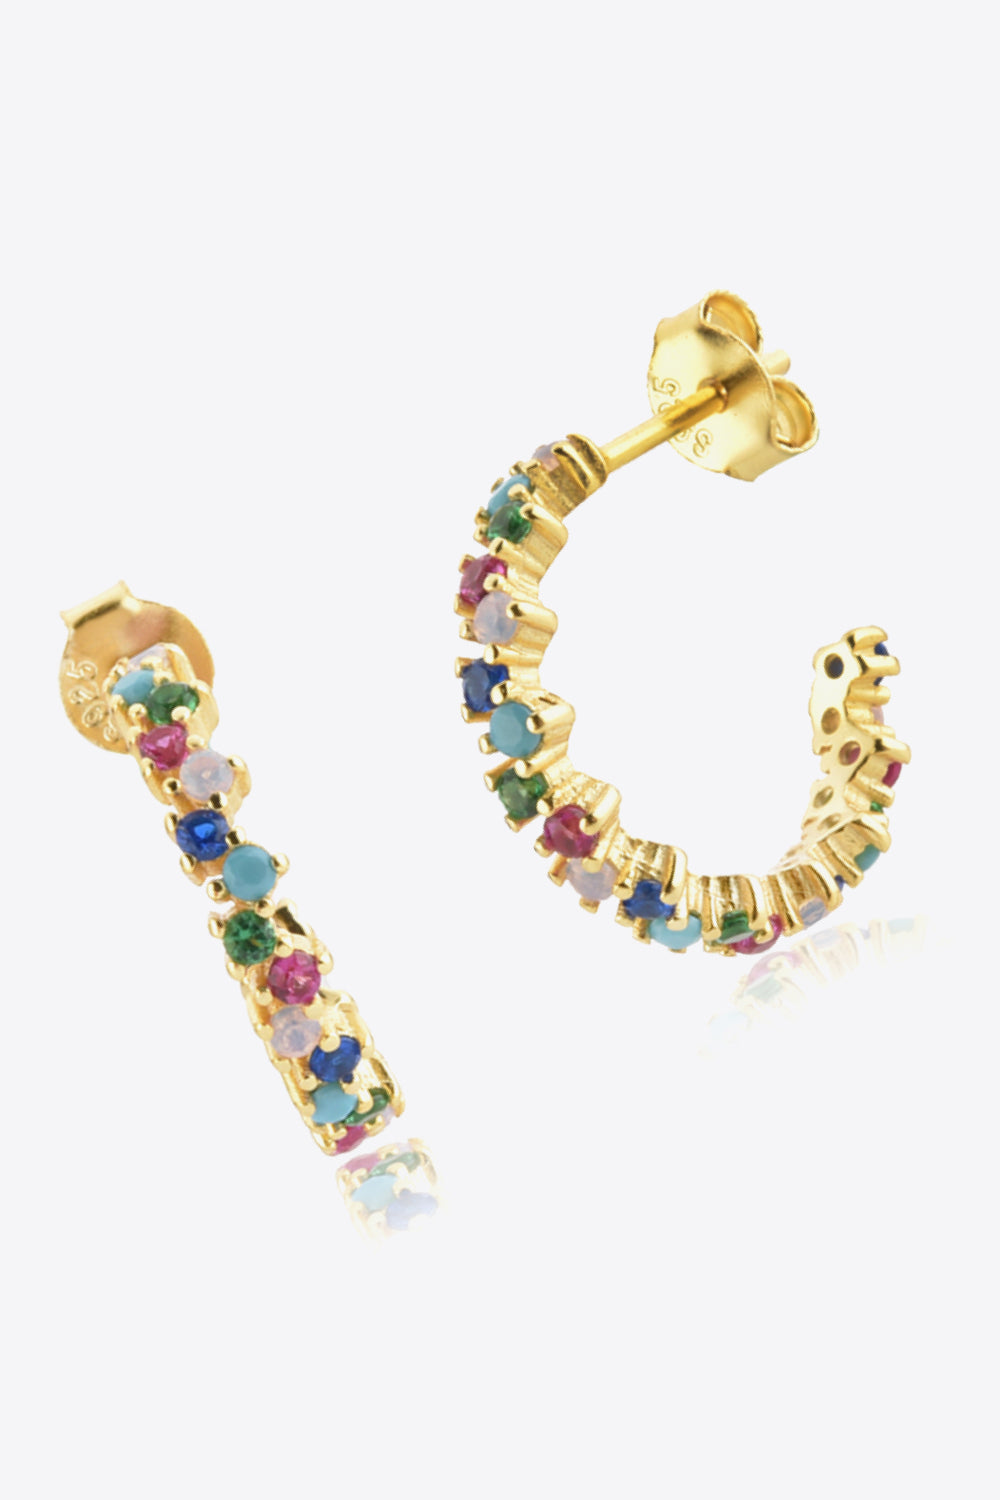 Imported C-Hoop Earrings: Stylish hoop-shaped earrings that have been imported, adding a touch of international flair to your jewelry collection.